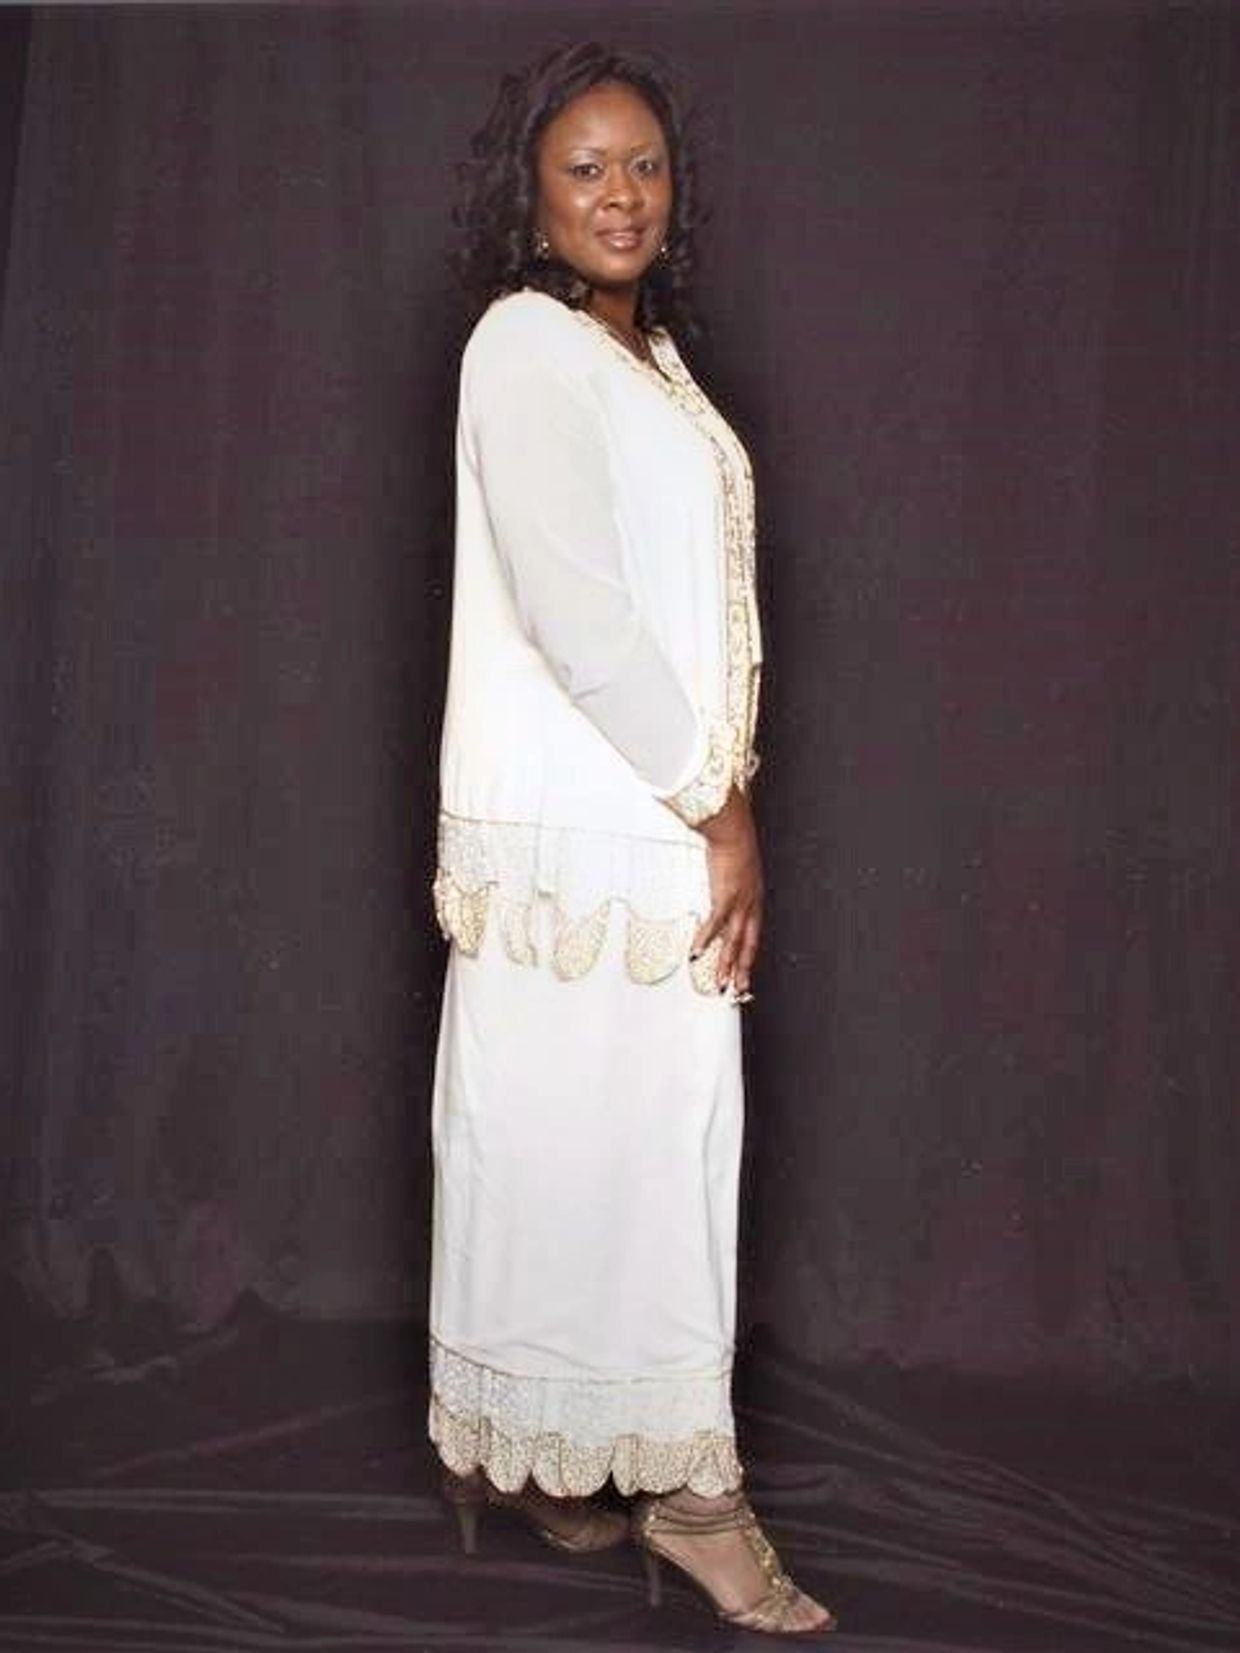 Prophetess Lynetta has been in ministry for over 20 years